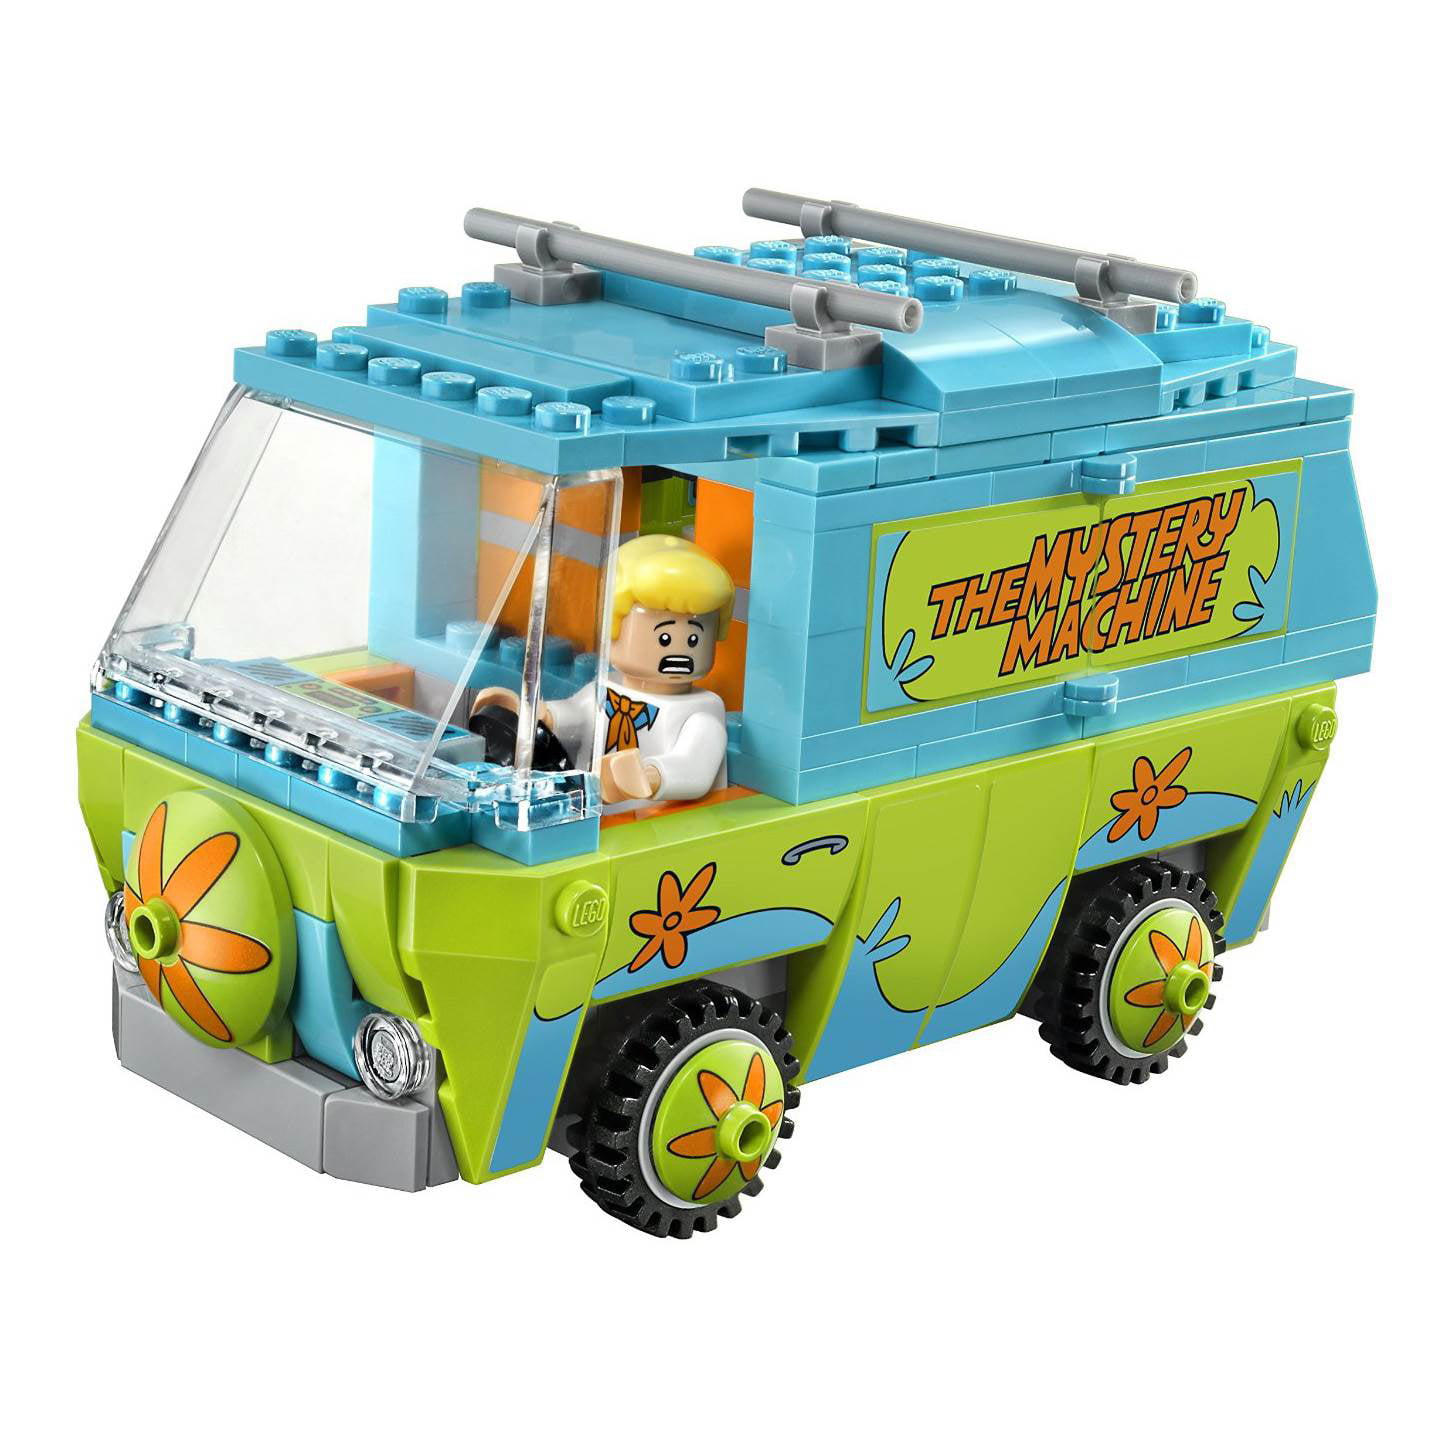 75902 Lego Scooby-Doo The Mystery Machine for sale online